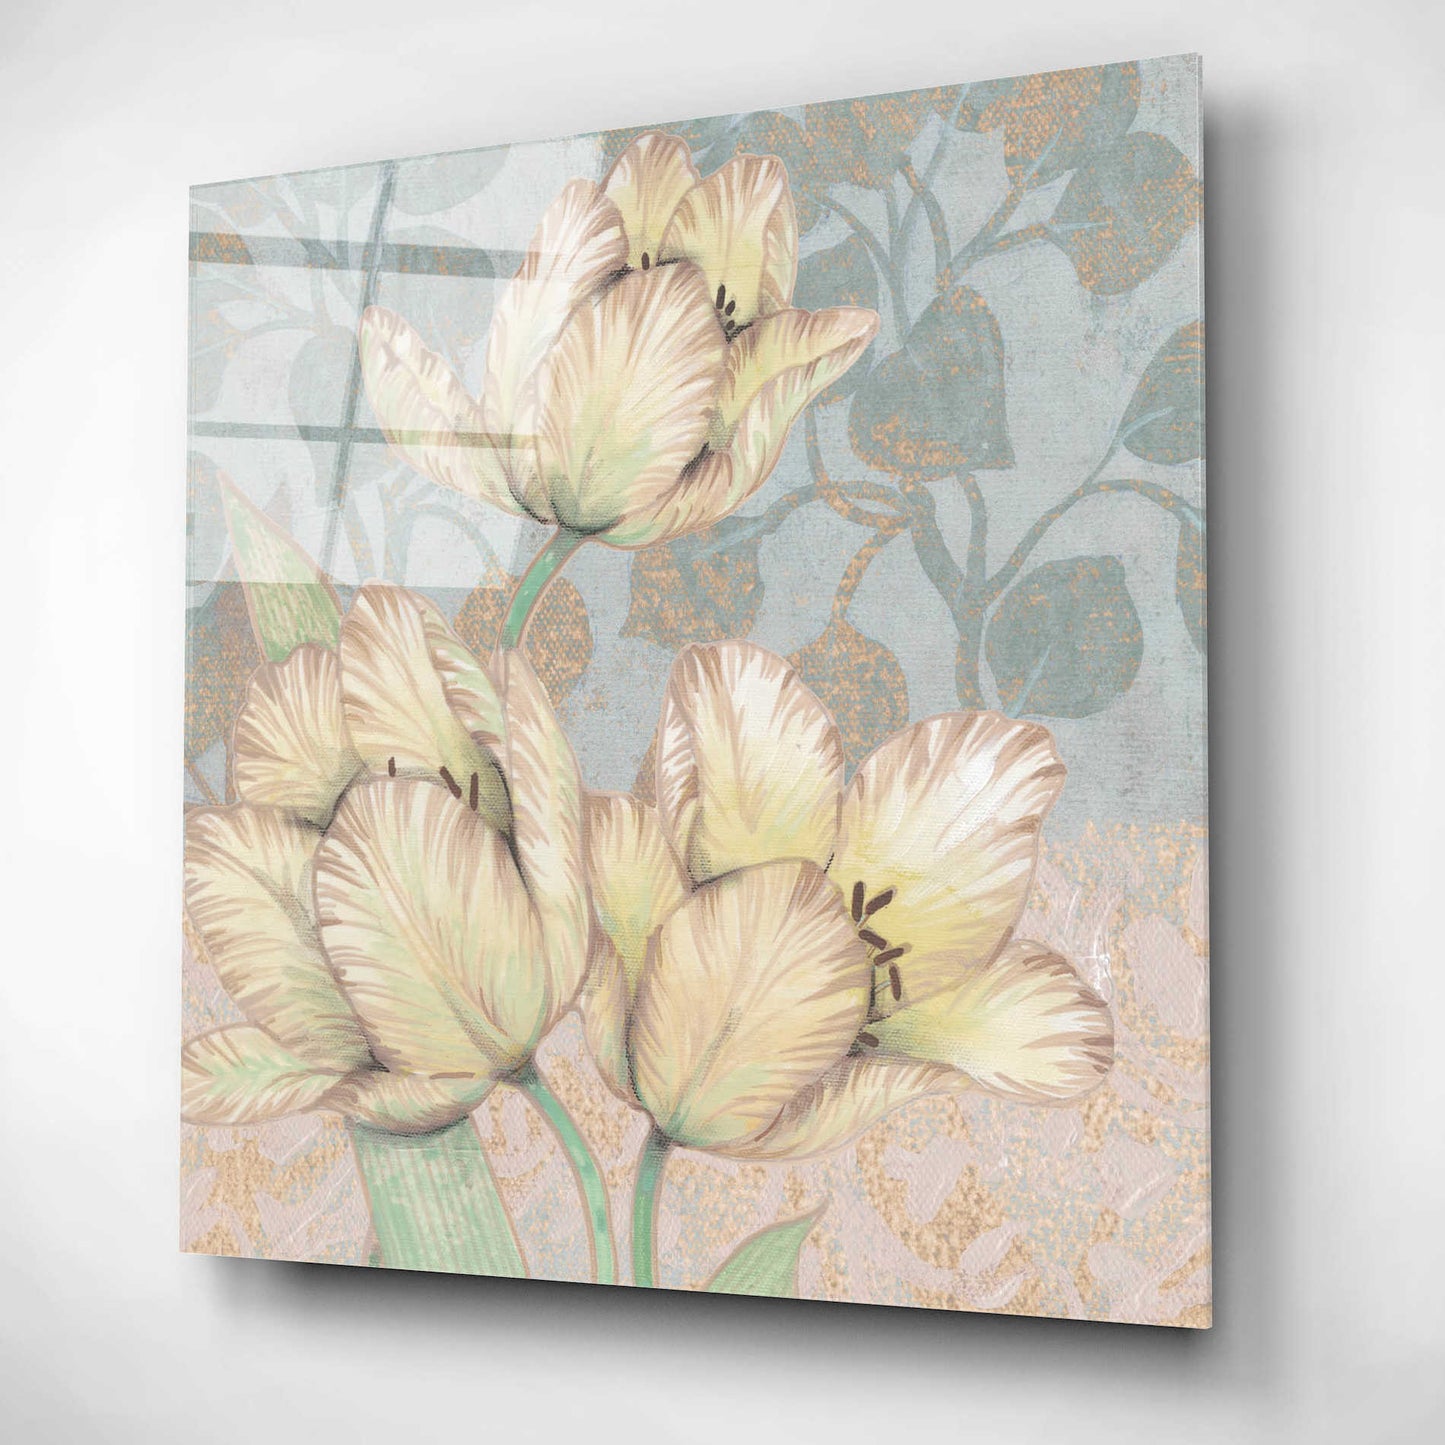 Epic Art 'Trois Fleurs Collection D' by Tim O'Toole, Acrylic Glass Wall Art,12x12